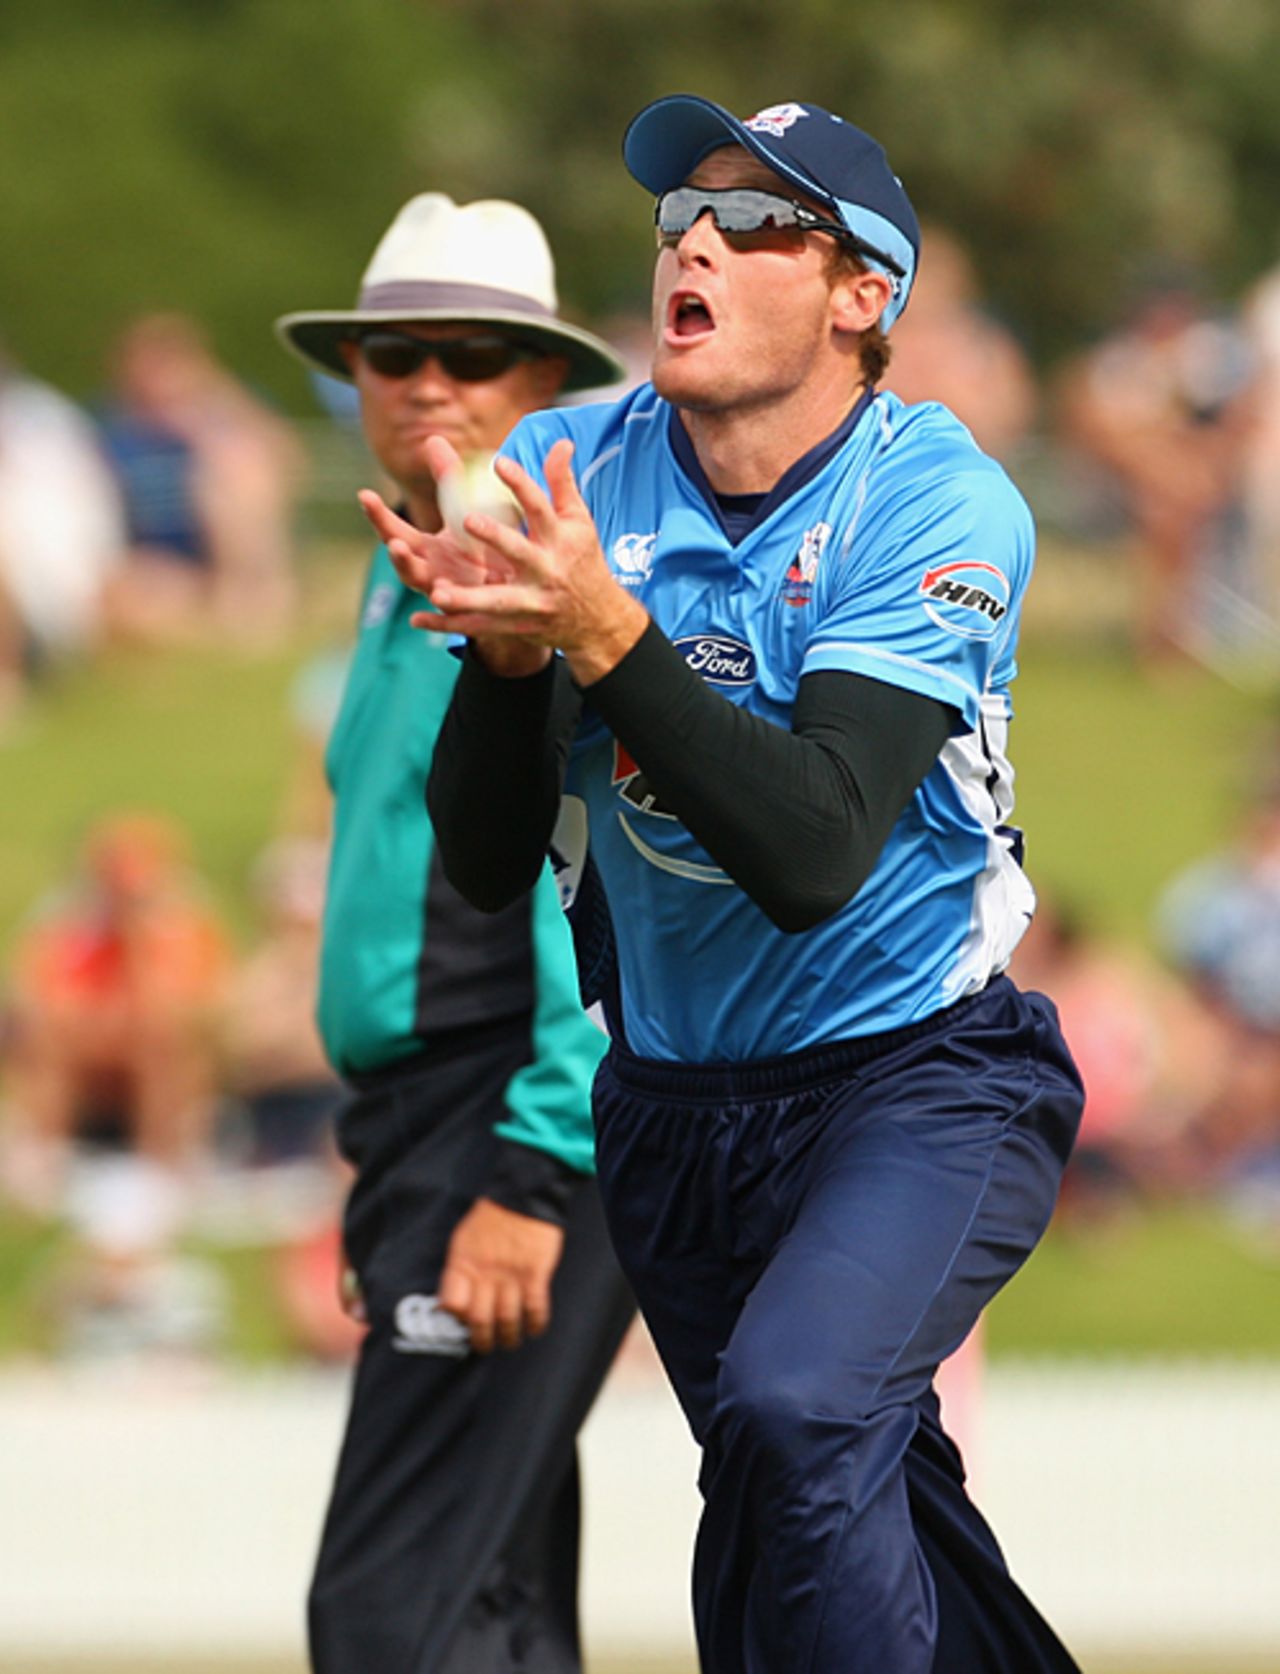 Martin Guptill catches the ball to end Daniel Vettori's innings, Northern Districts v Auckland, HRV Cup, Mt Maunganui, January 2, 2010 